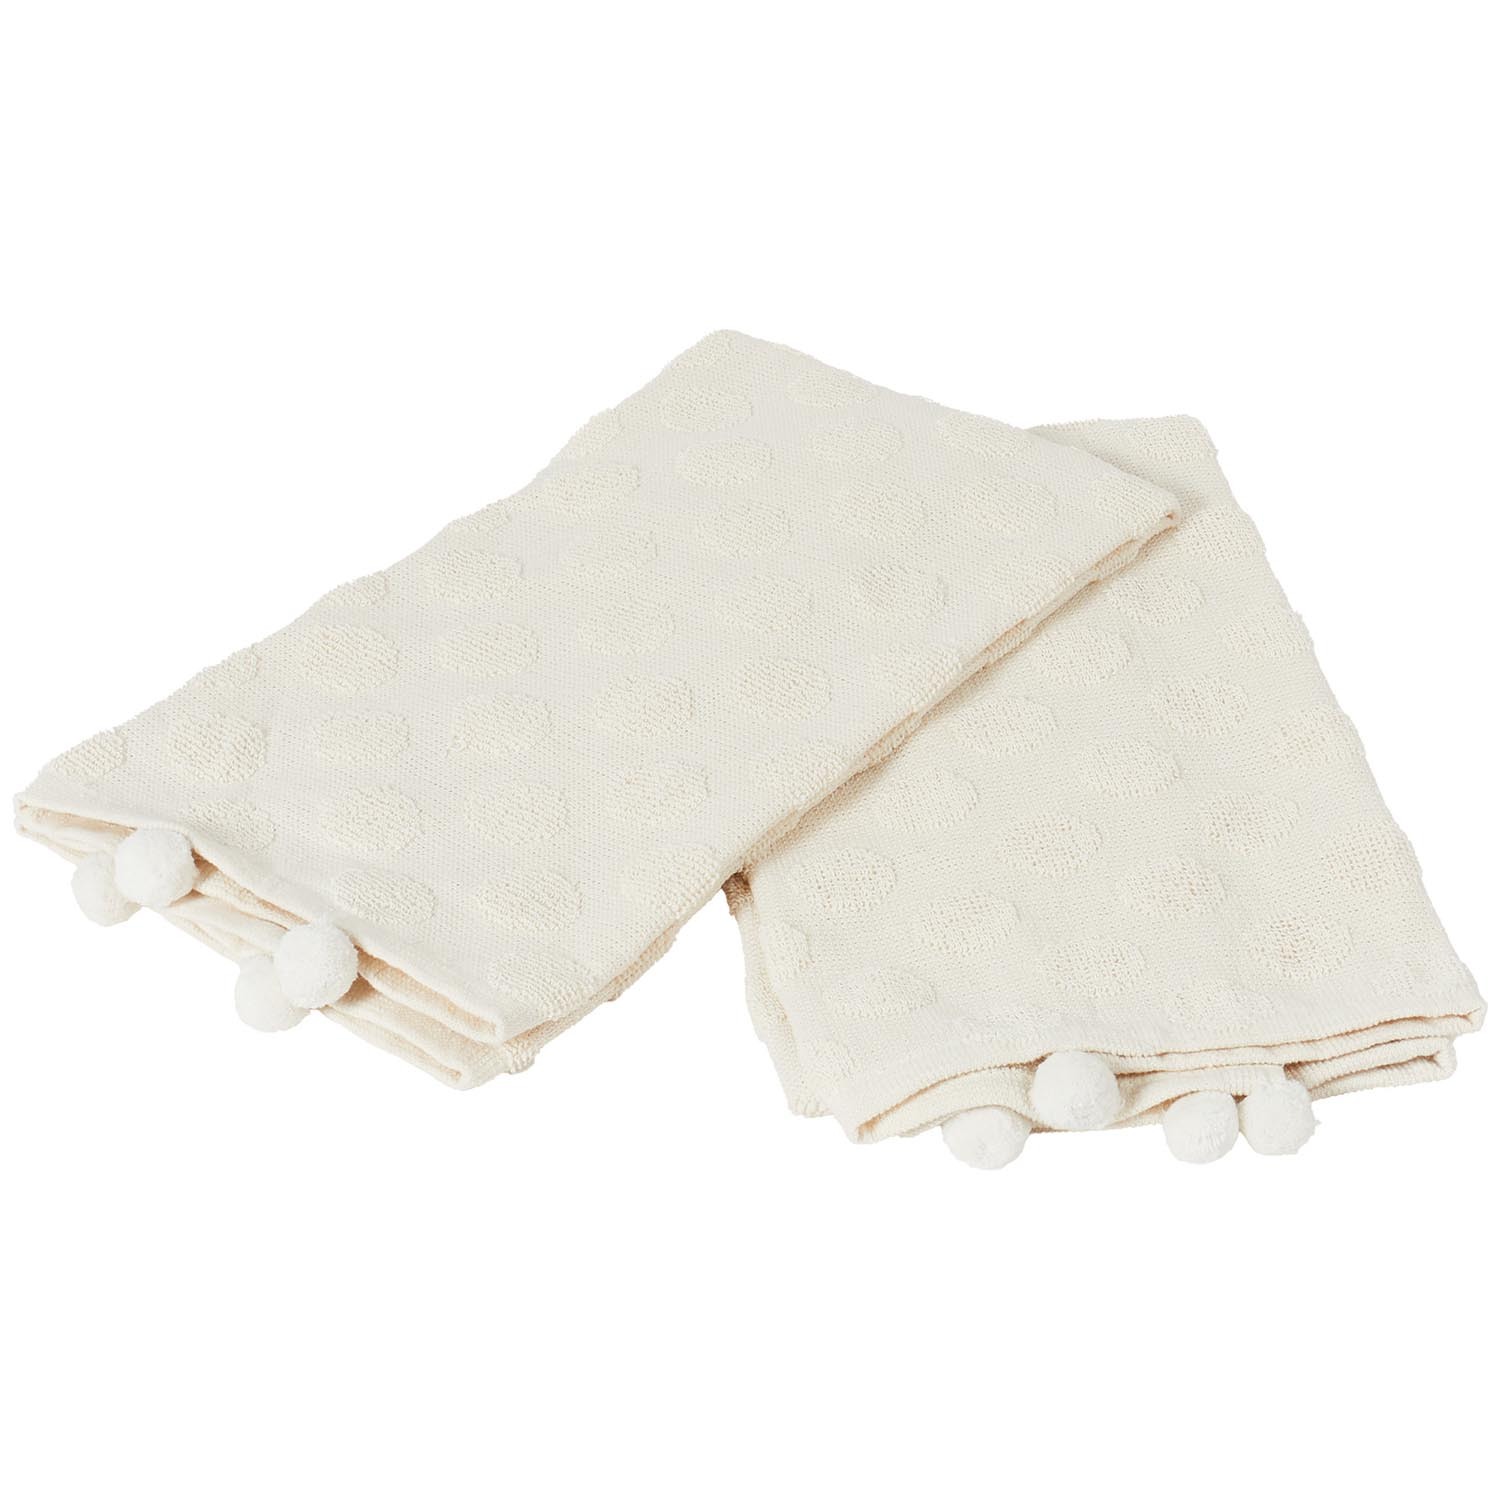 Pack of 2 Dobby Terry Kitchen Towels with Pom Poms - Cream Image 4